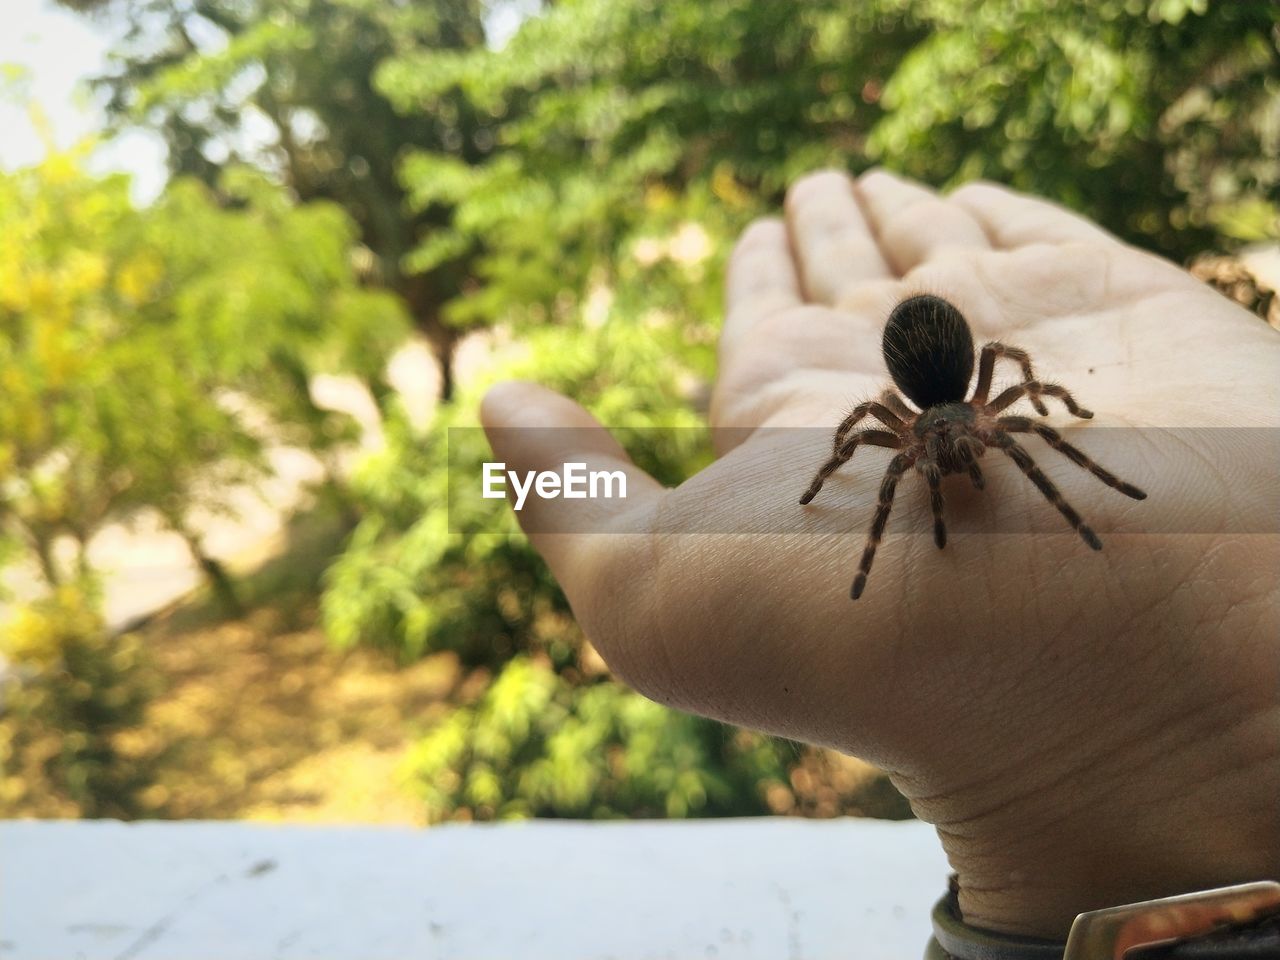 Close-up of insect on hand, tarantula.